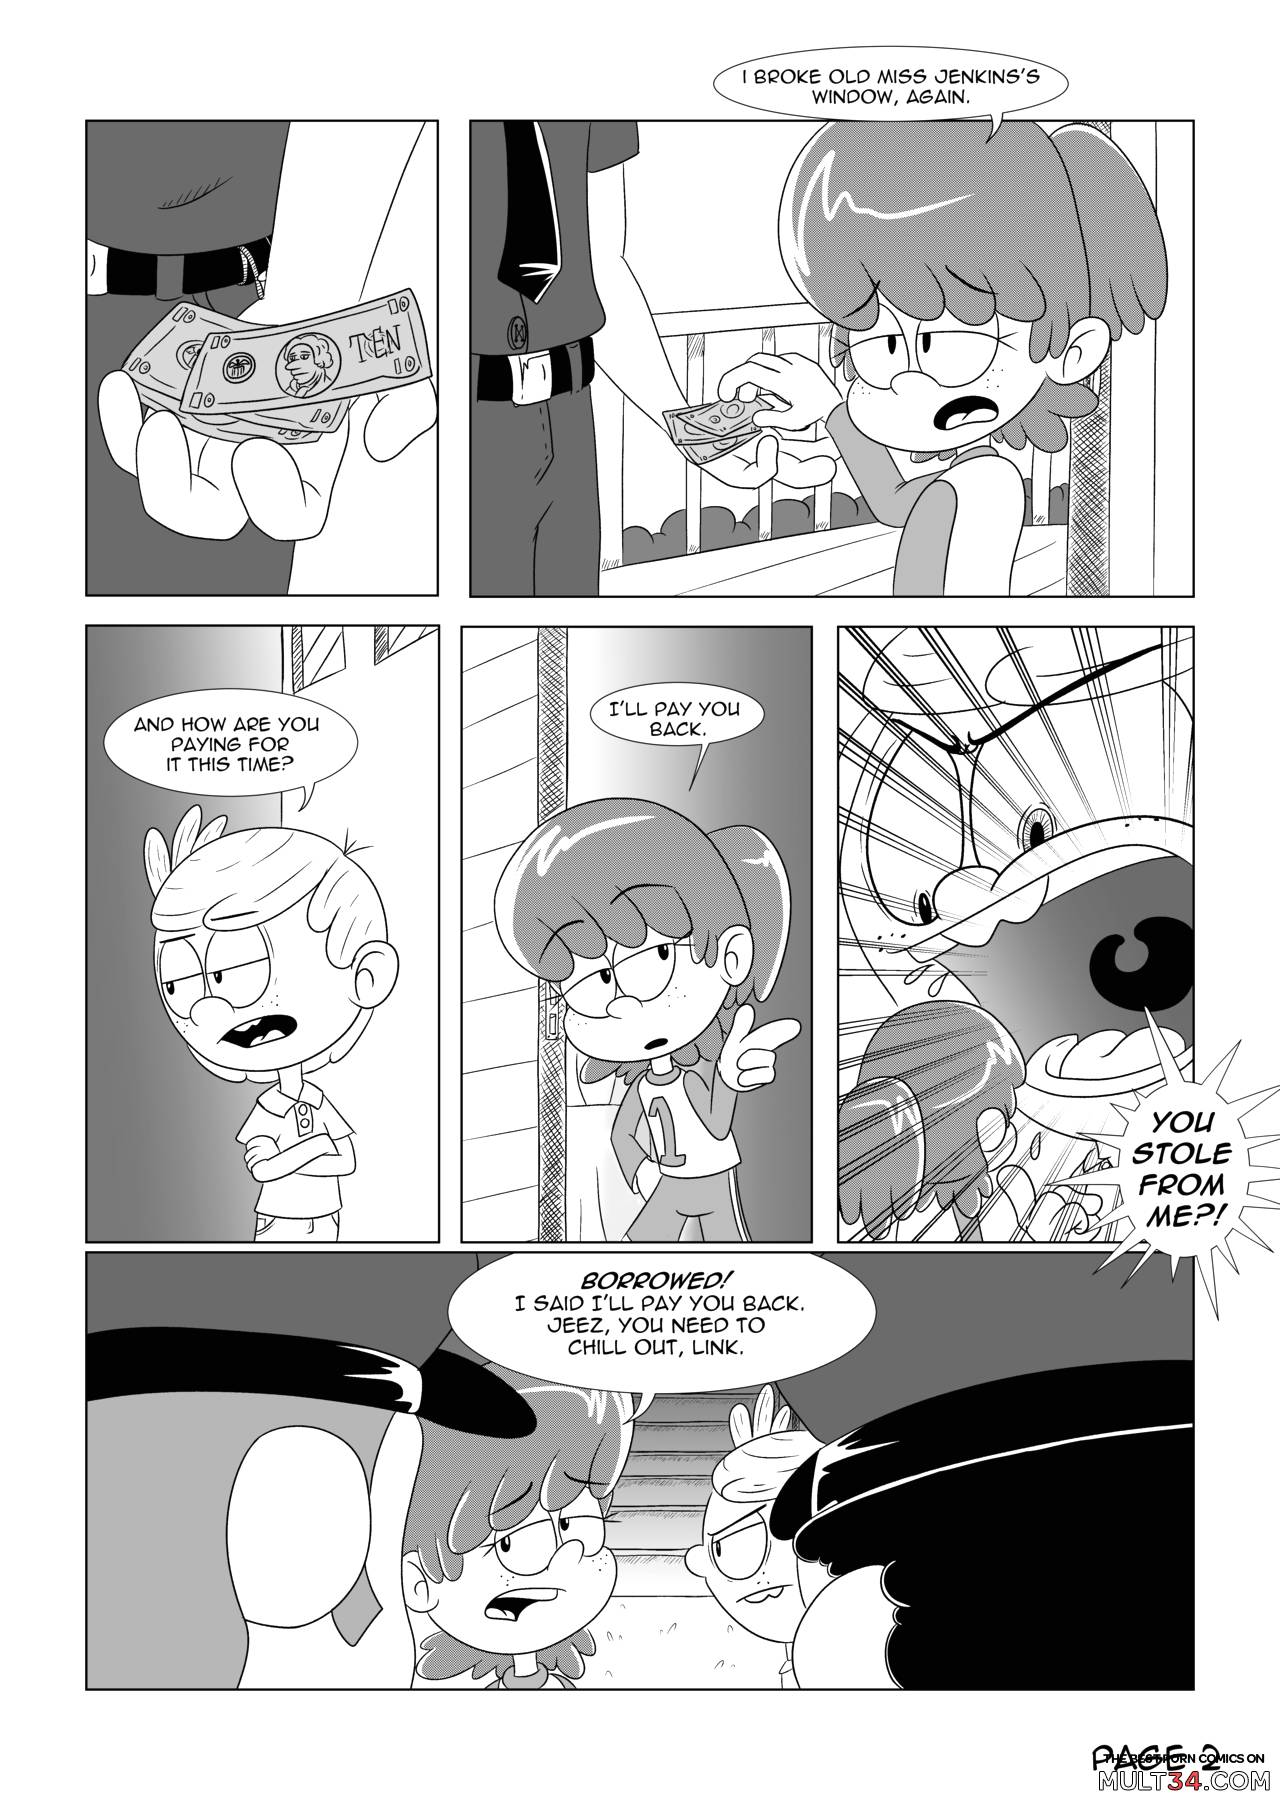 The loud house comic, chapter 3 page 3